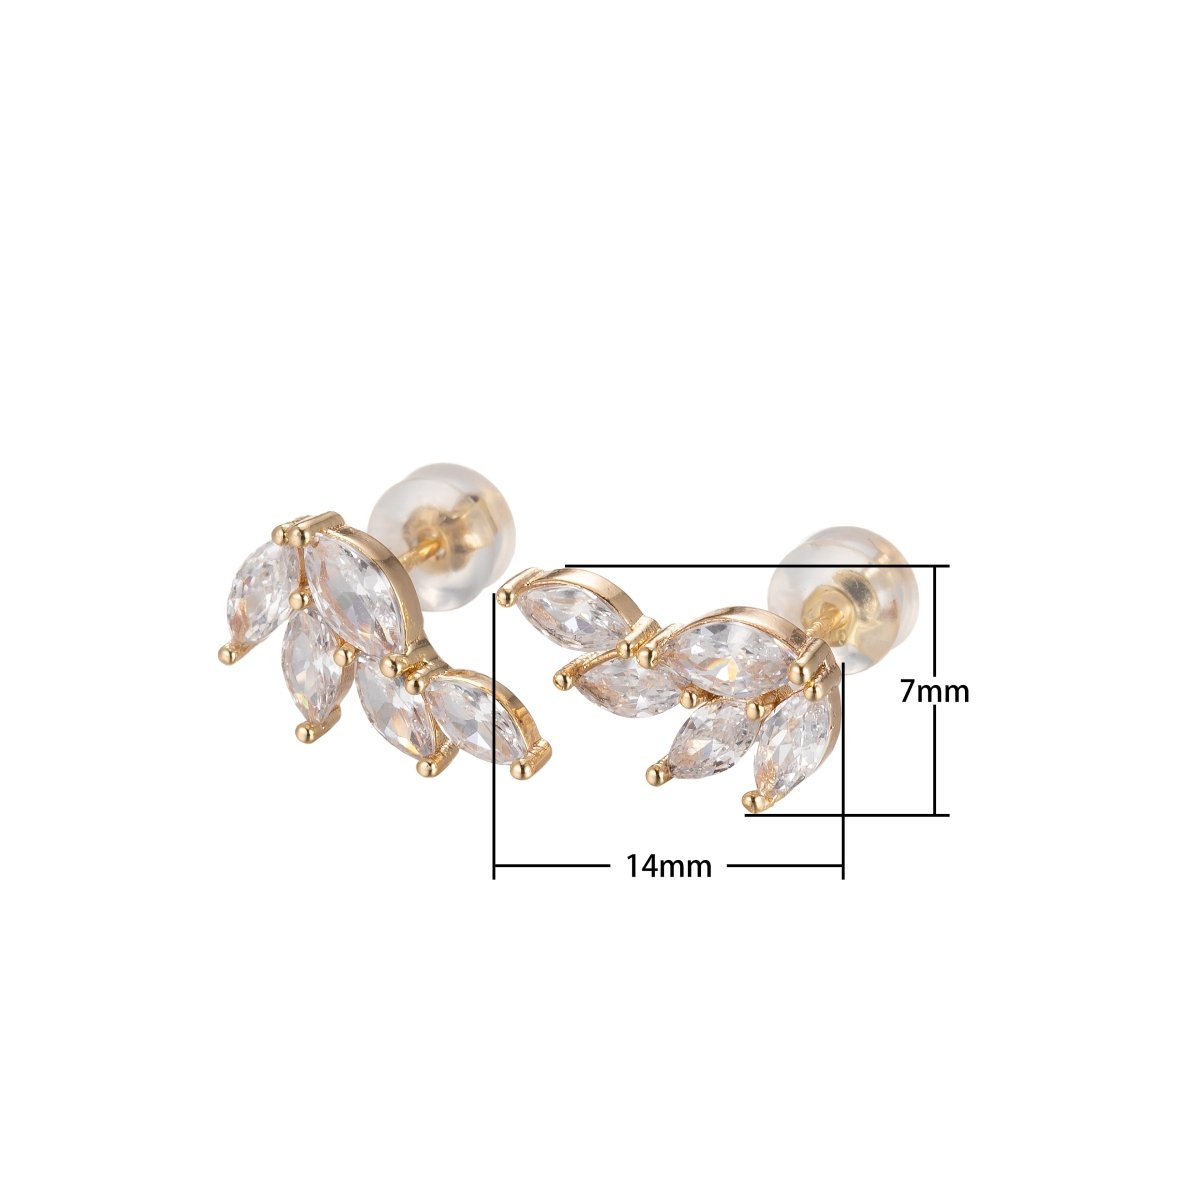 Crystal Leaves Studs Earring CZ Crystal Stone Floral Nature Leaves Daily Earring Jewelry P-194 - DLUXCA